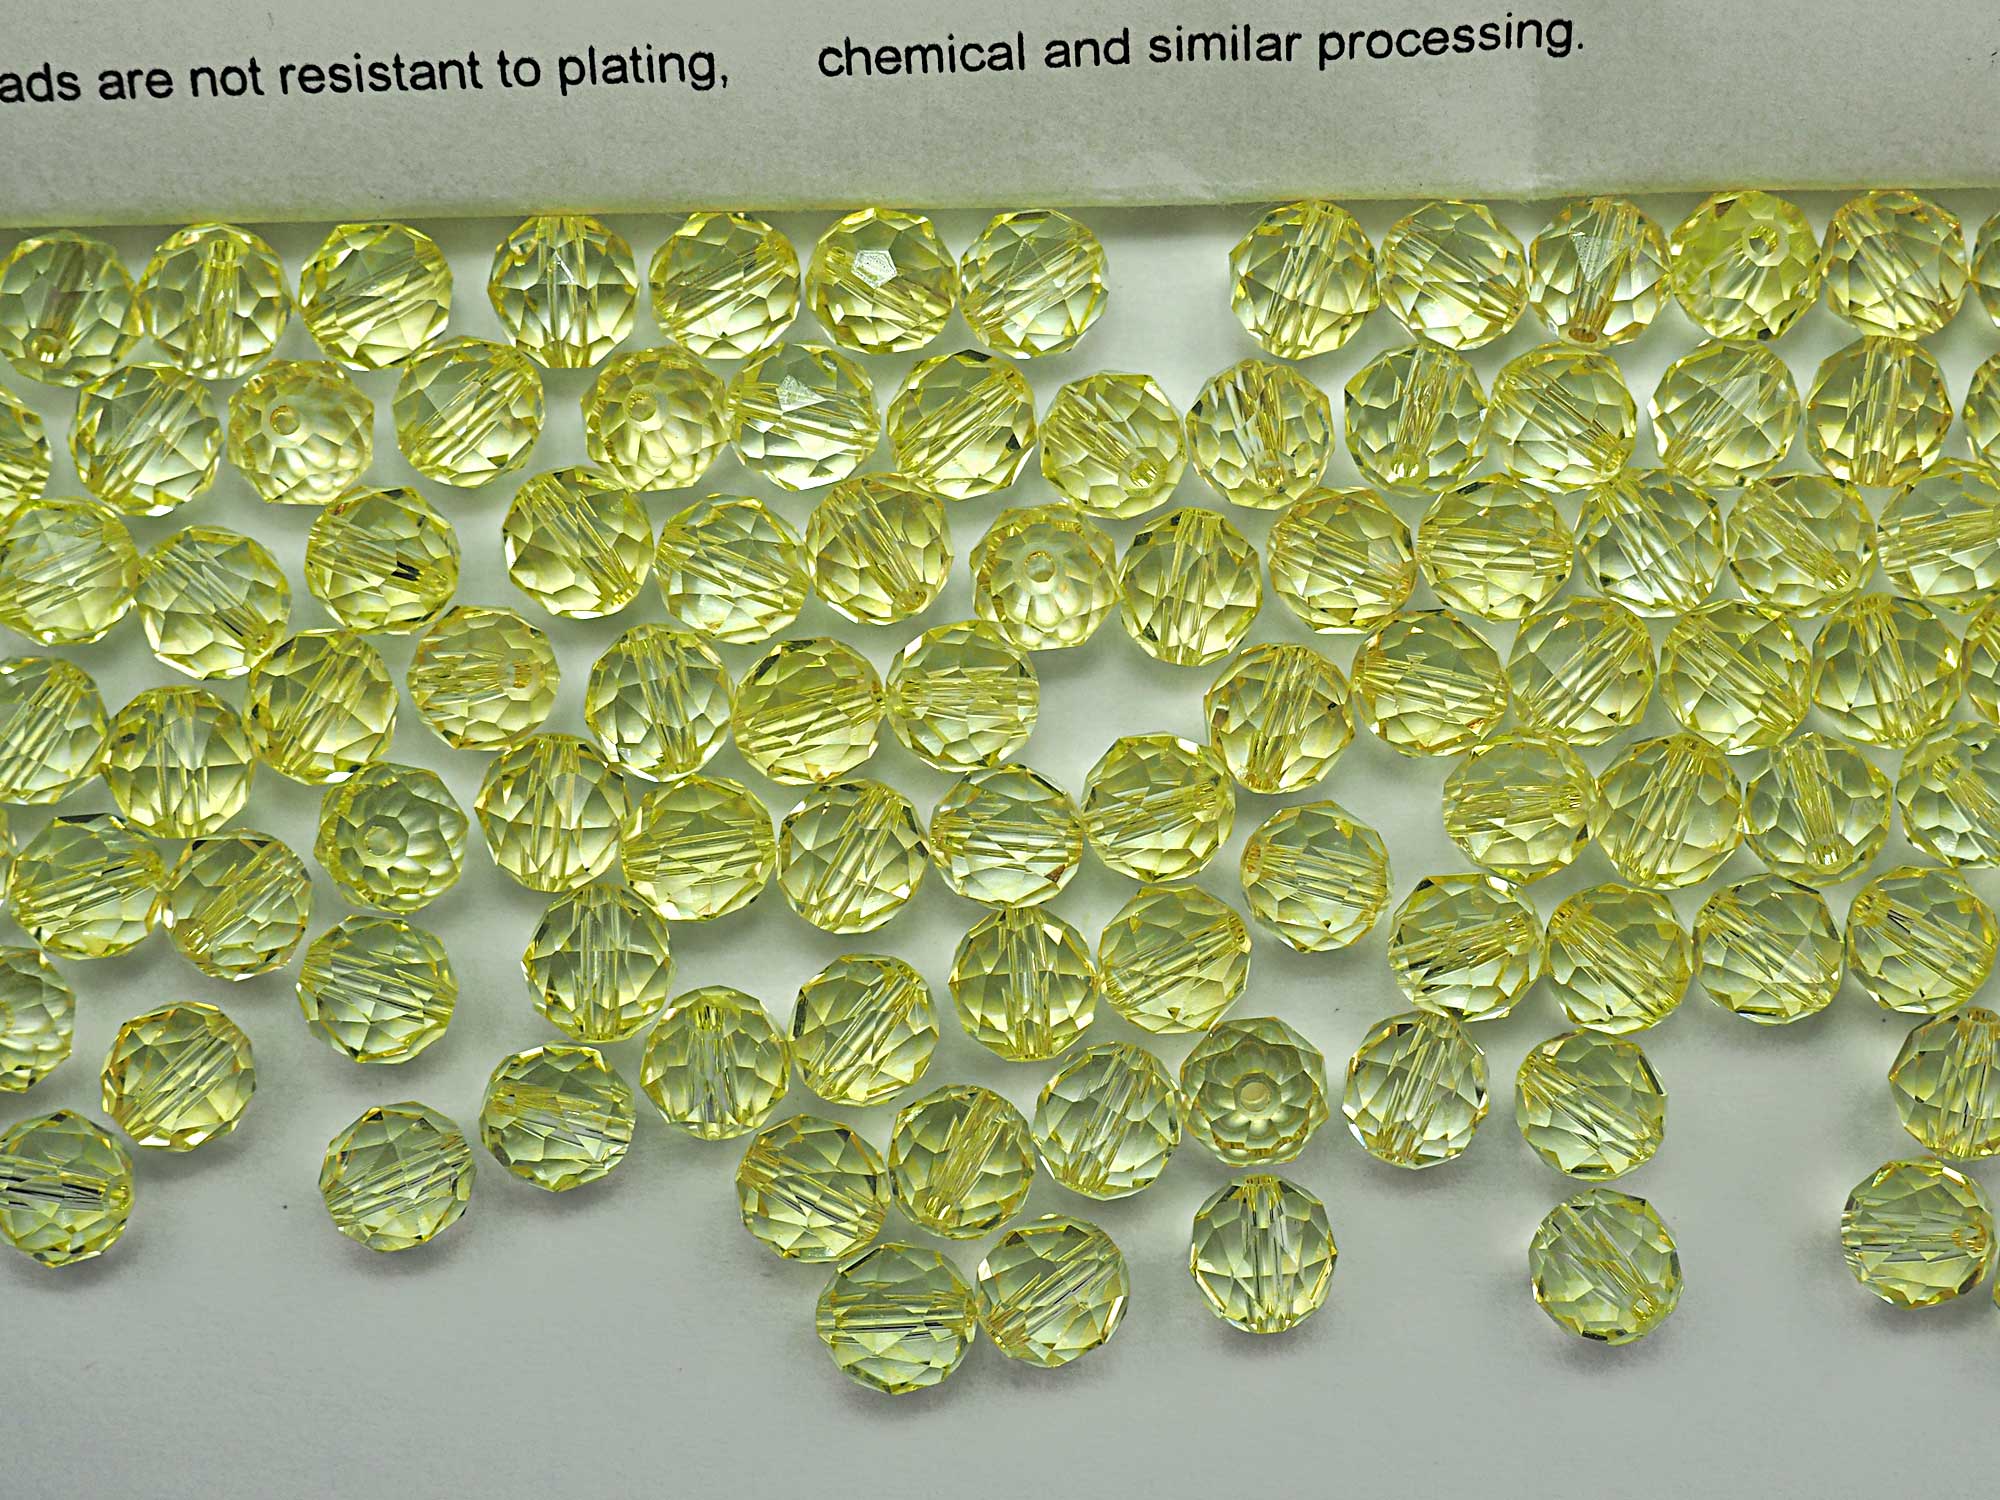 Crystal Medium Yellow coated, Preciosa Czech Machine Cut Europe Crystal Beads in size 6mm, 288 pieces